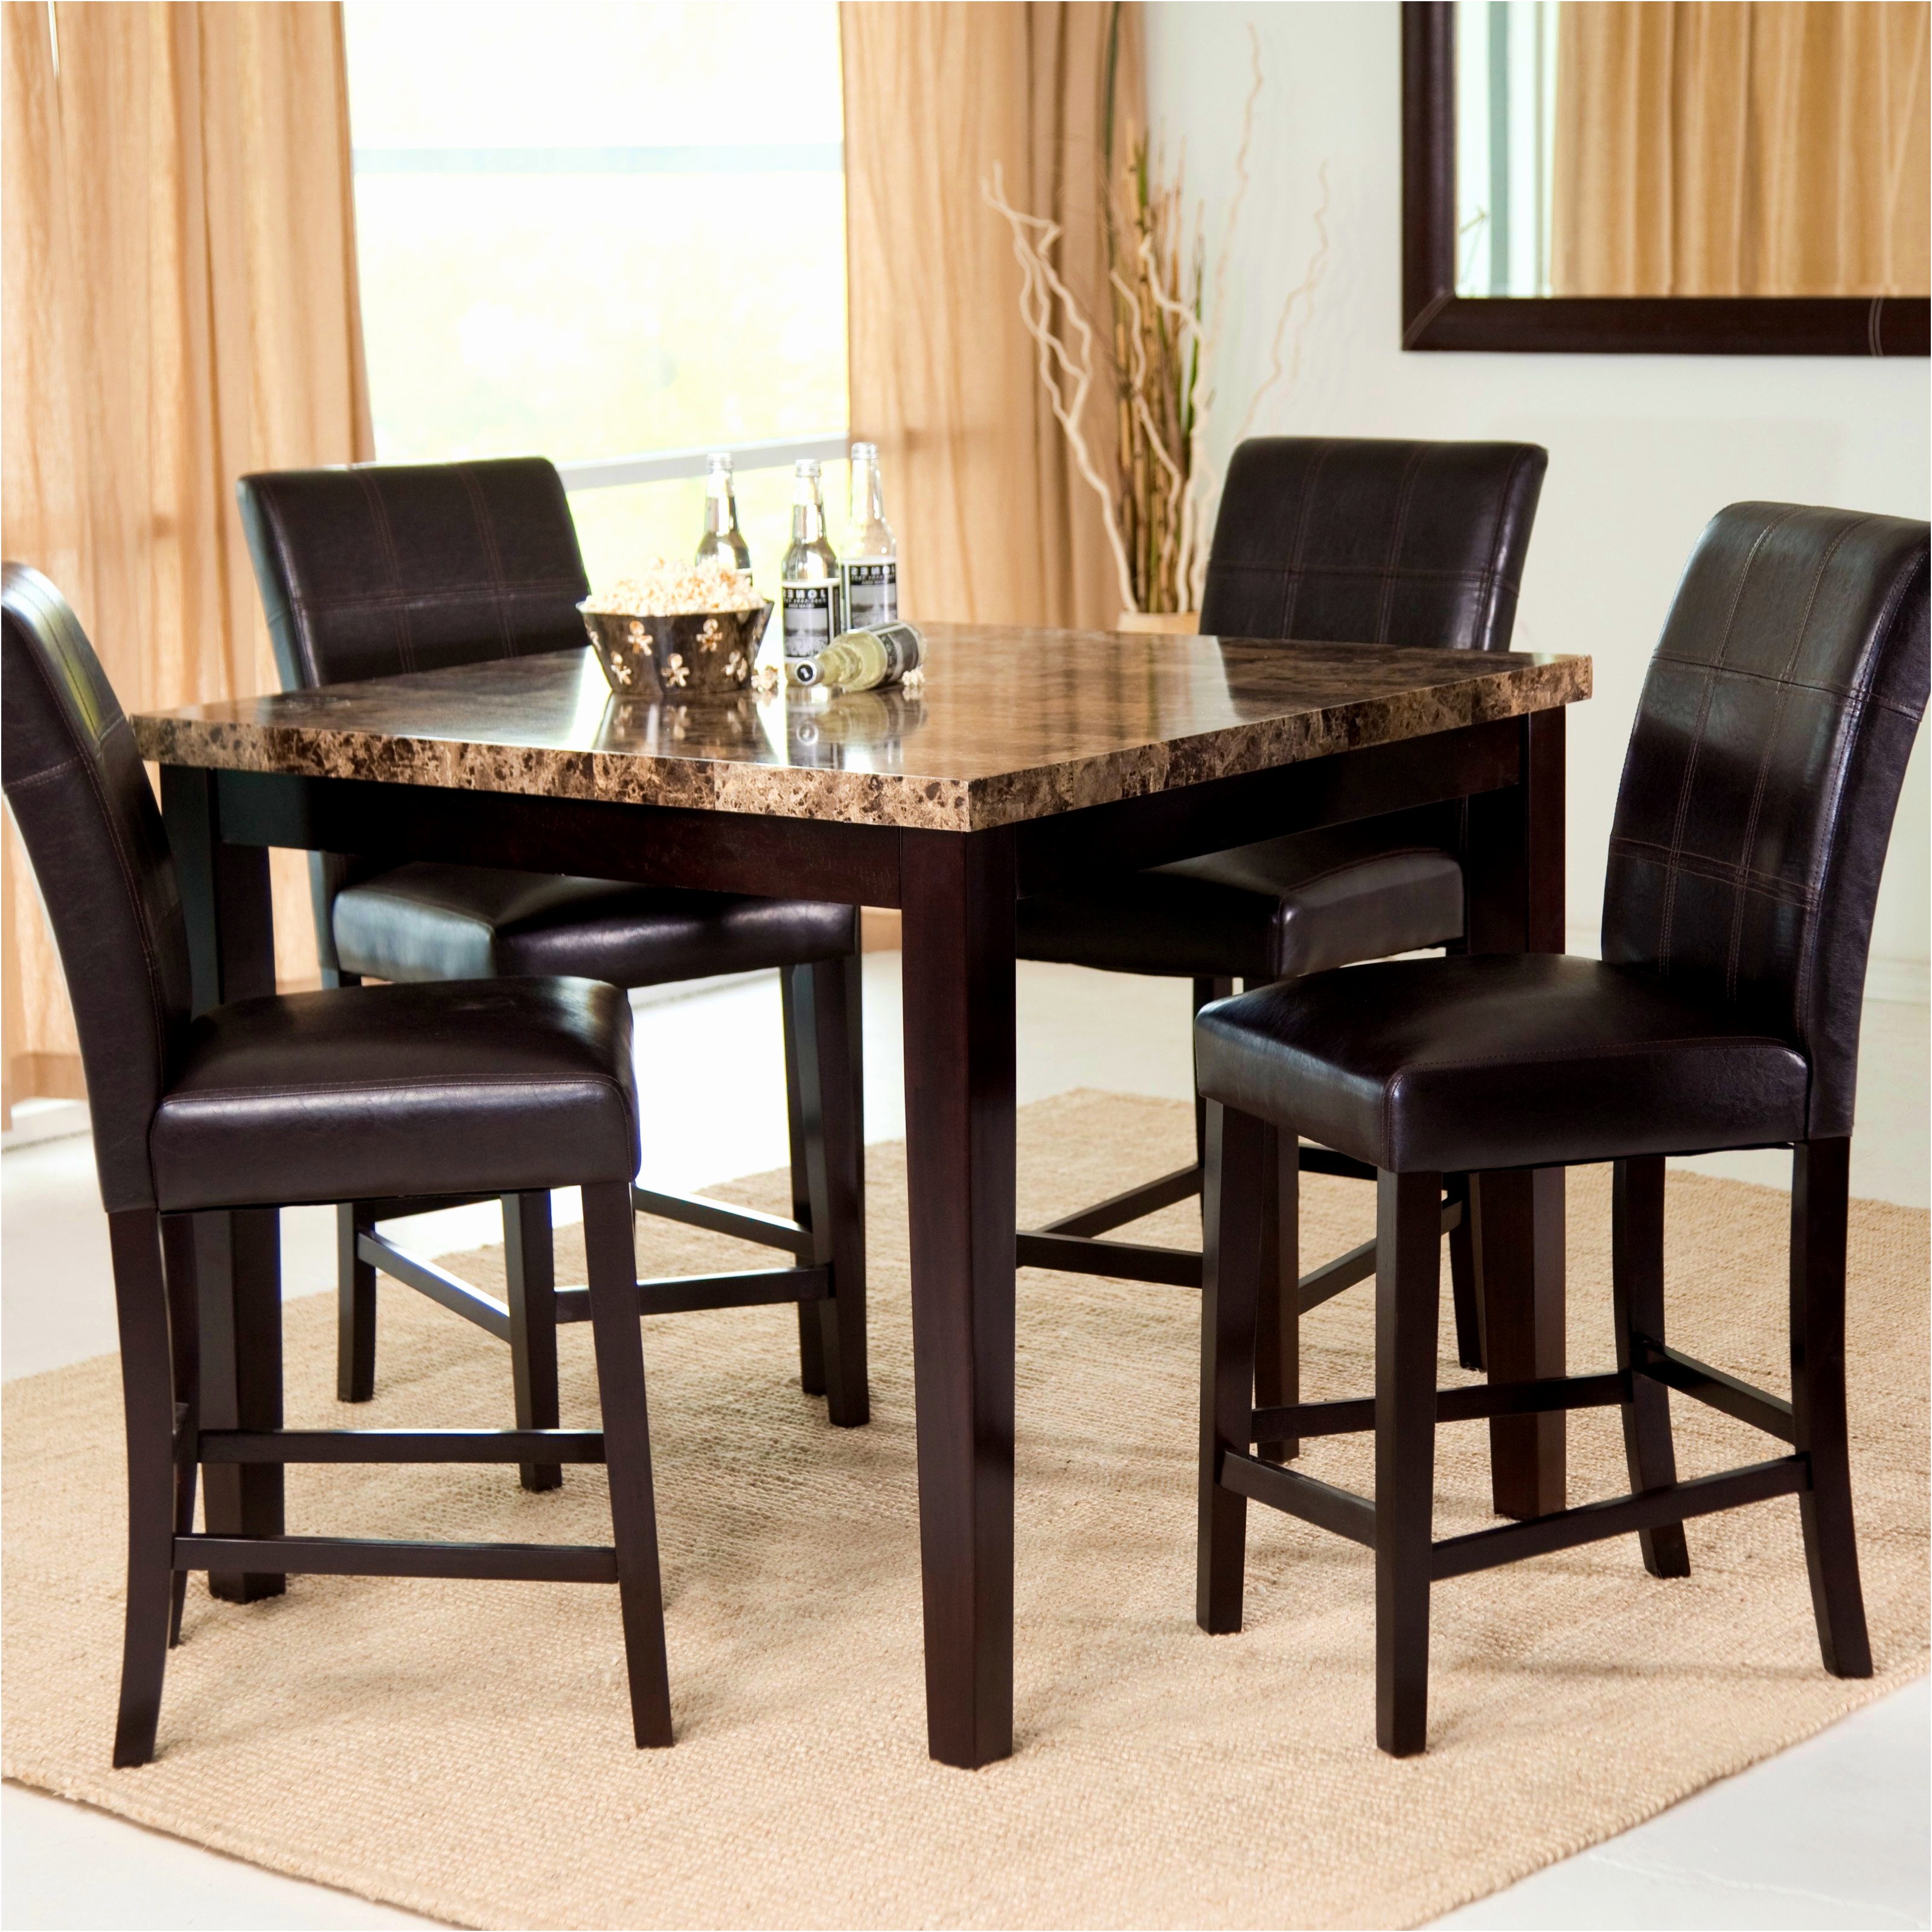 Square dining table for 12 - Hawk Haven